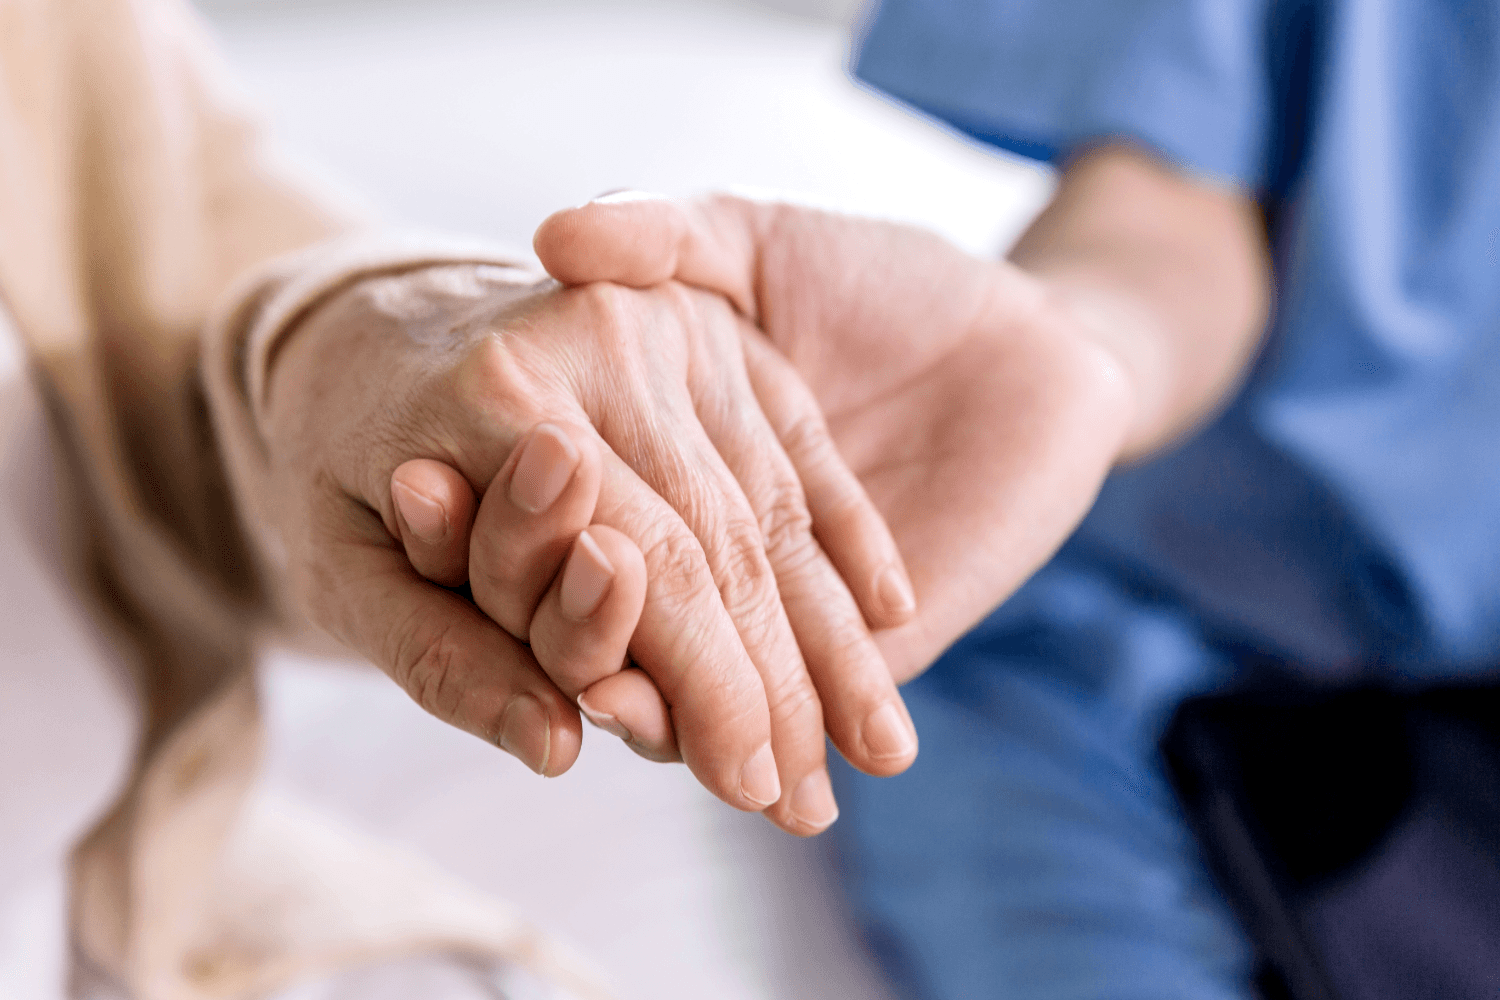 Image of a care worker holding hand for support